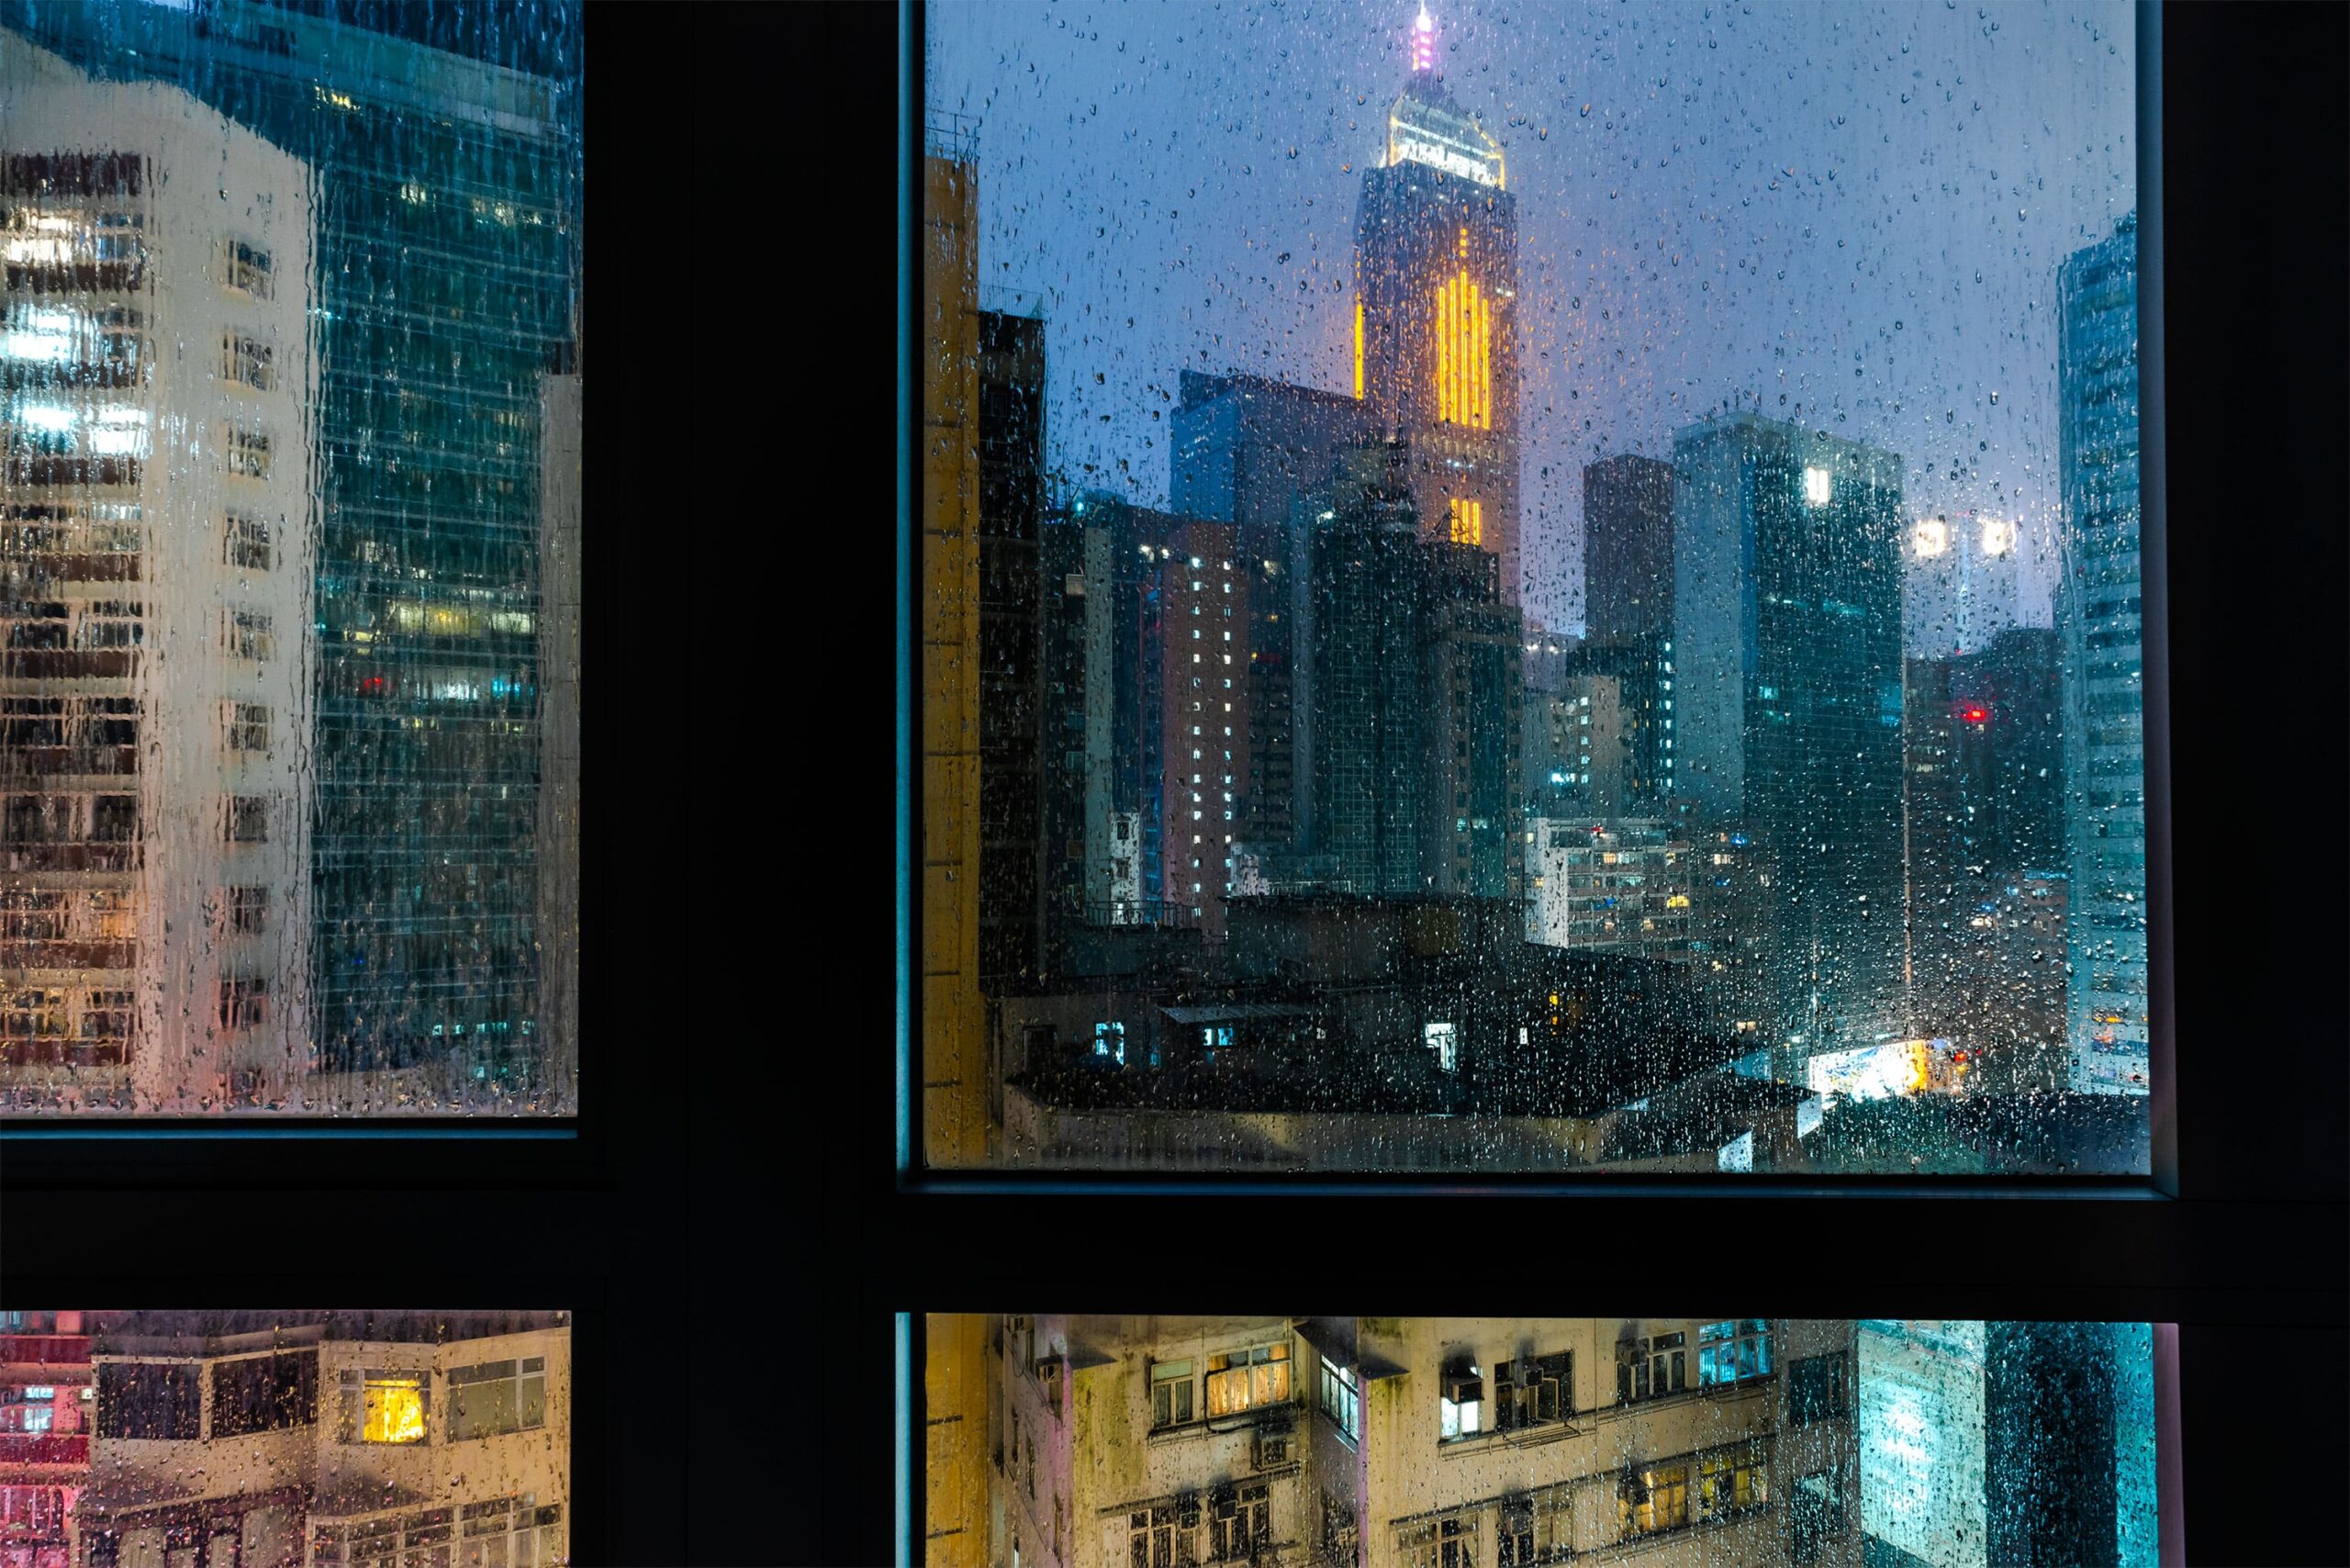 Behold the dramatic night view over Hong Kong from the 40th floor amidst a raging typhoon and thunderstorm. This urban landscape photograph captures the electrifying energy of the cityscape as it braves the elements of nature. With the skyline illuminated by flashes of lightning and the tumultuous clouds swirling overhead, the scene exudes an intense and awe-inspiring atmosphere. A testament to the resilience and vibrancy of urban life in Asia, this captivating image offers a glimpse into the raw power and beauty of nature's fury against the backdrop of a bustling metropolis.